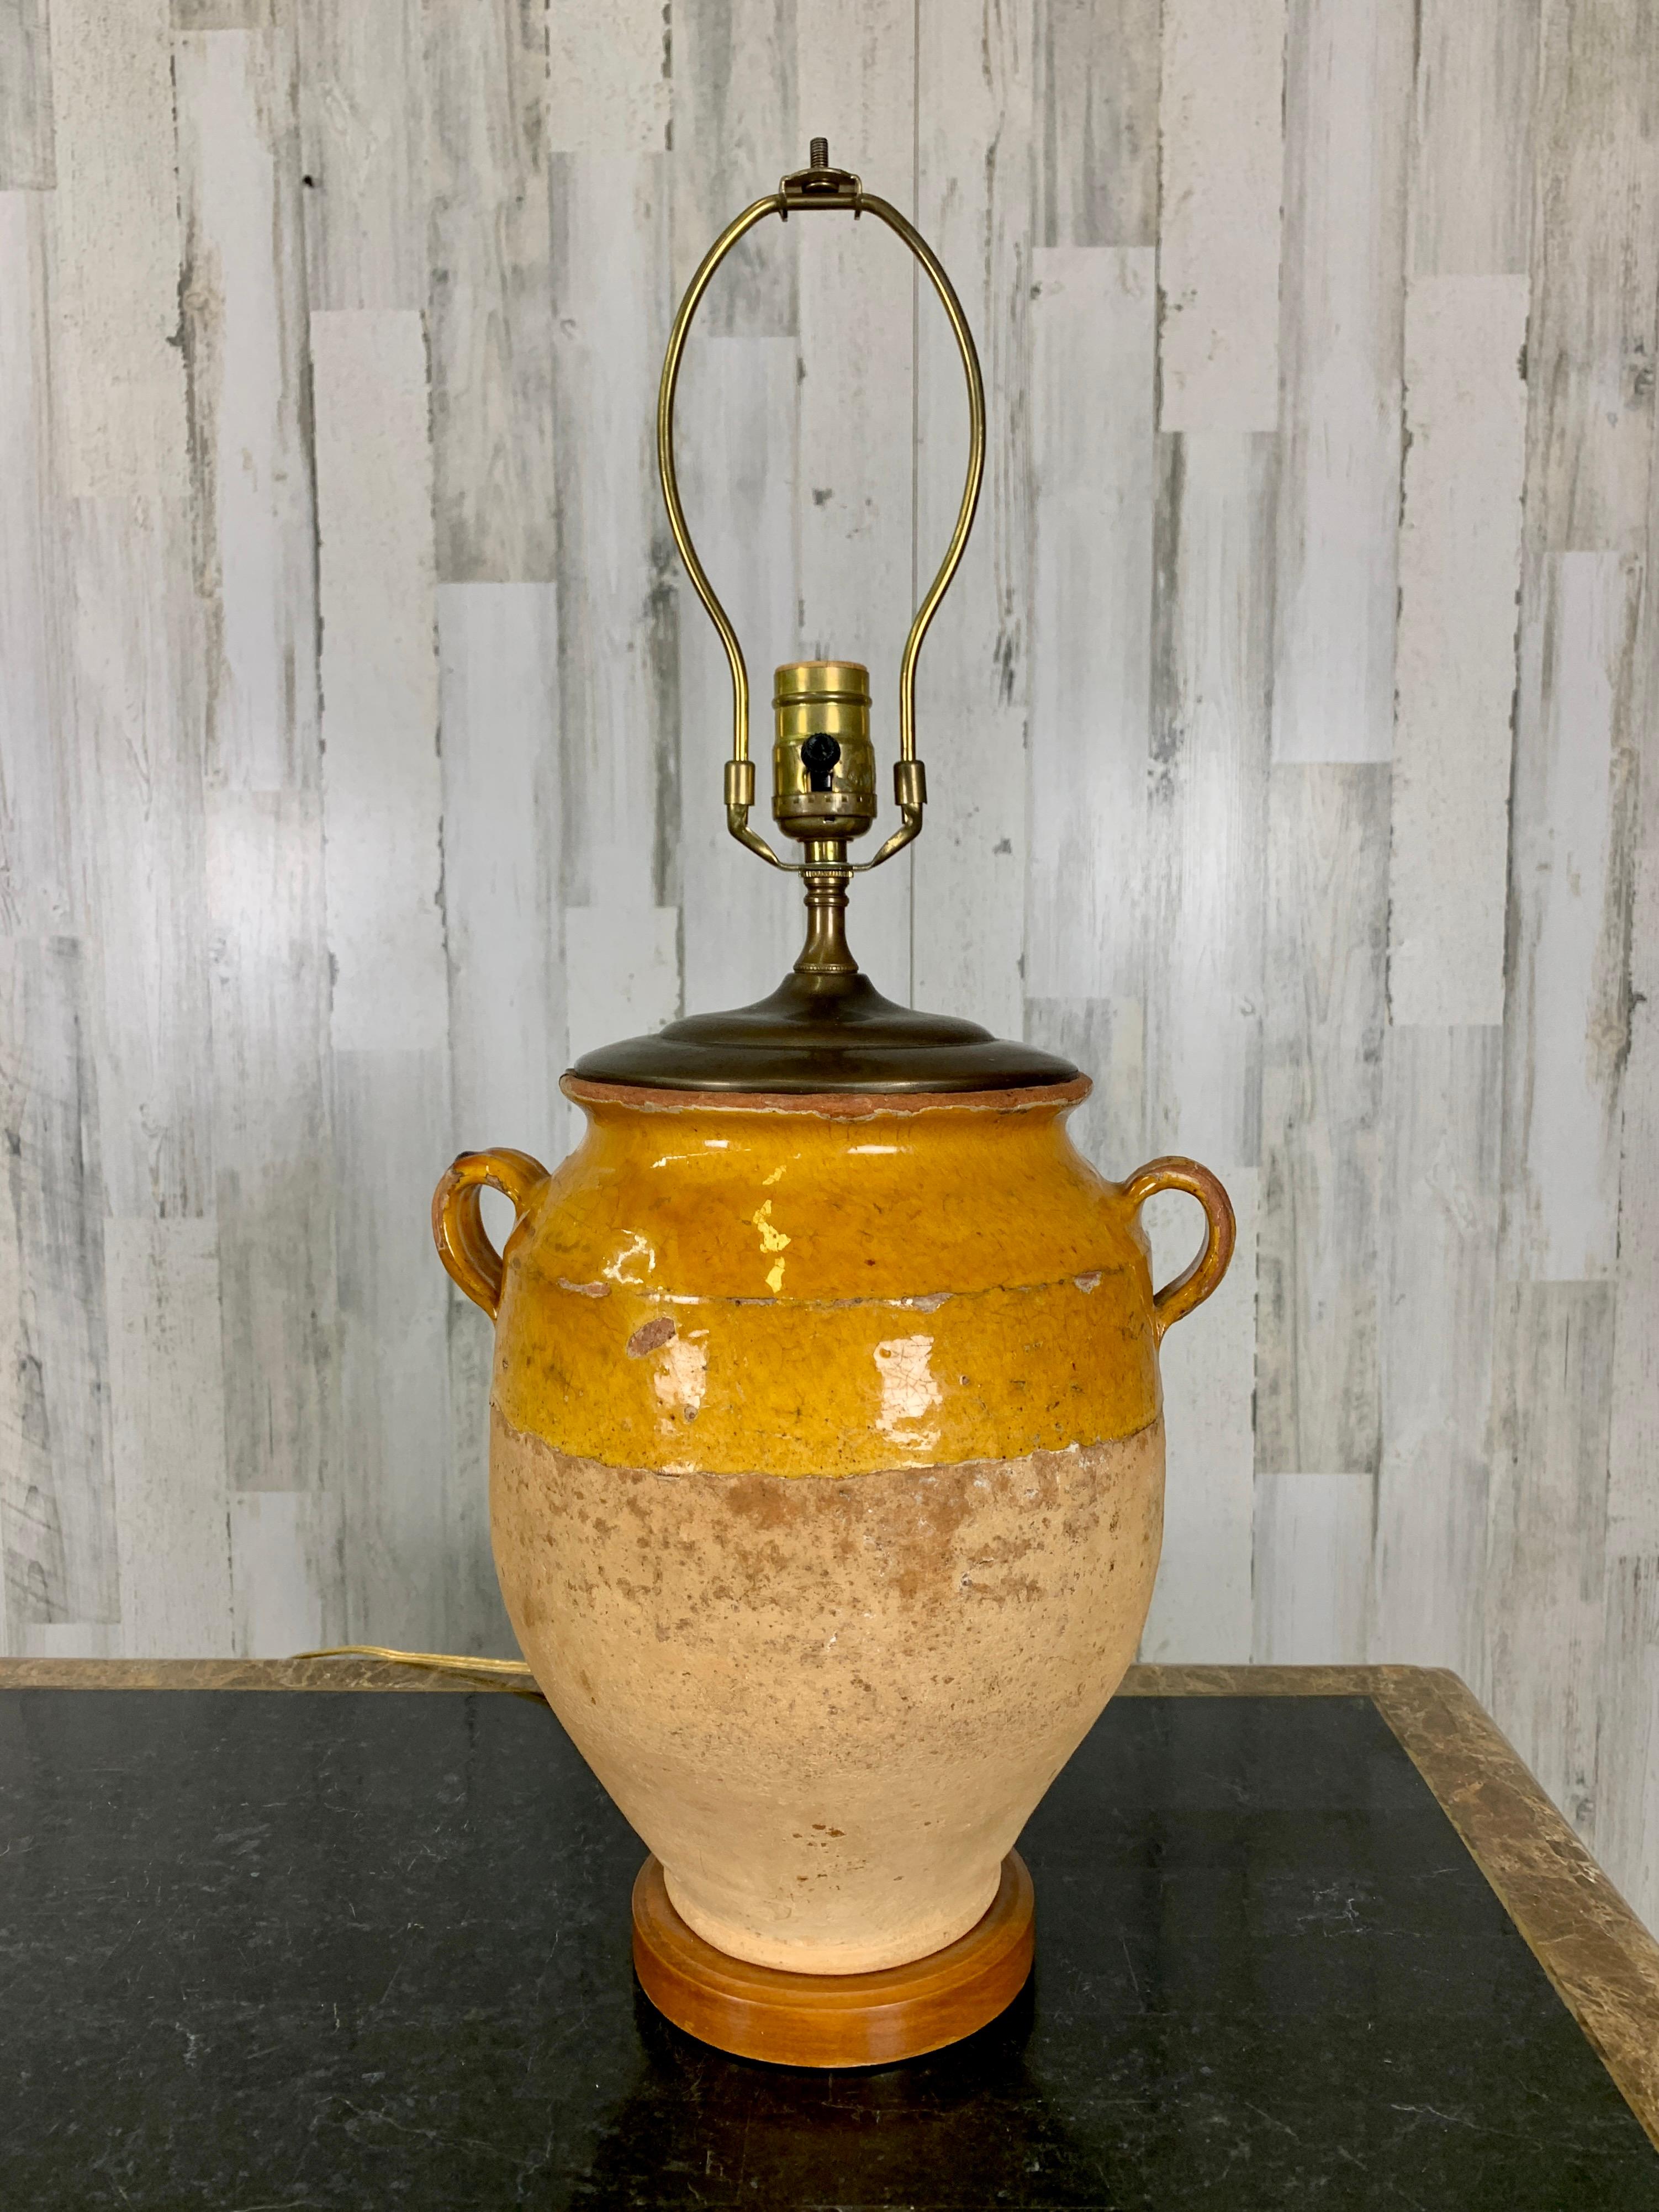 Antique ochre glaze confit pot with modern table lamp conversion.
This was originally used to store food in the cellar. Minor loss of glaze, please see pictures.